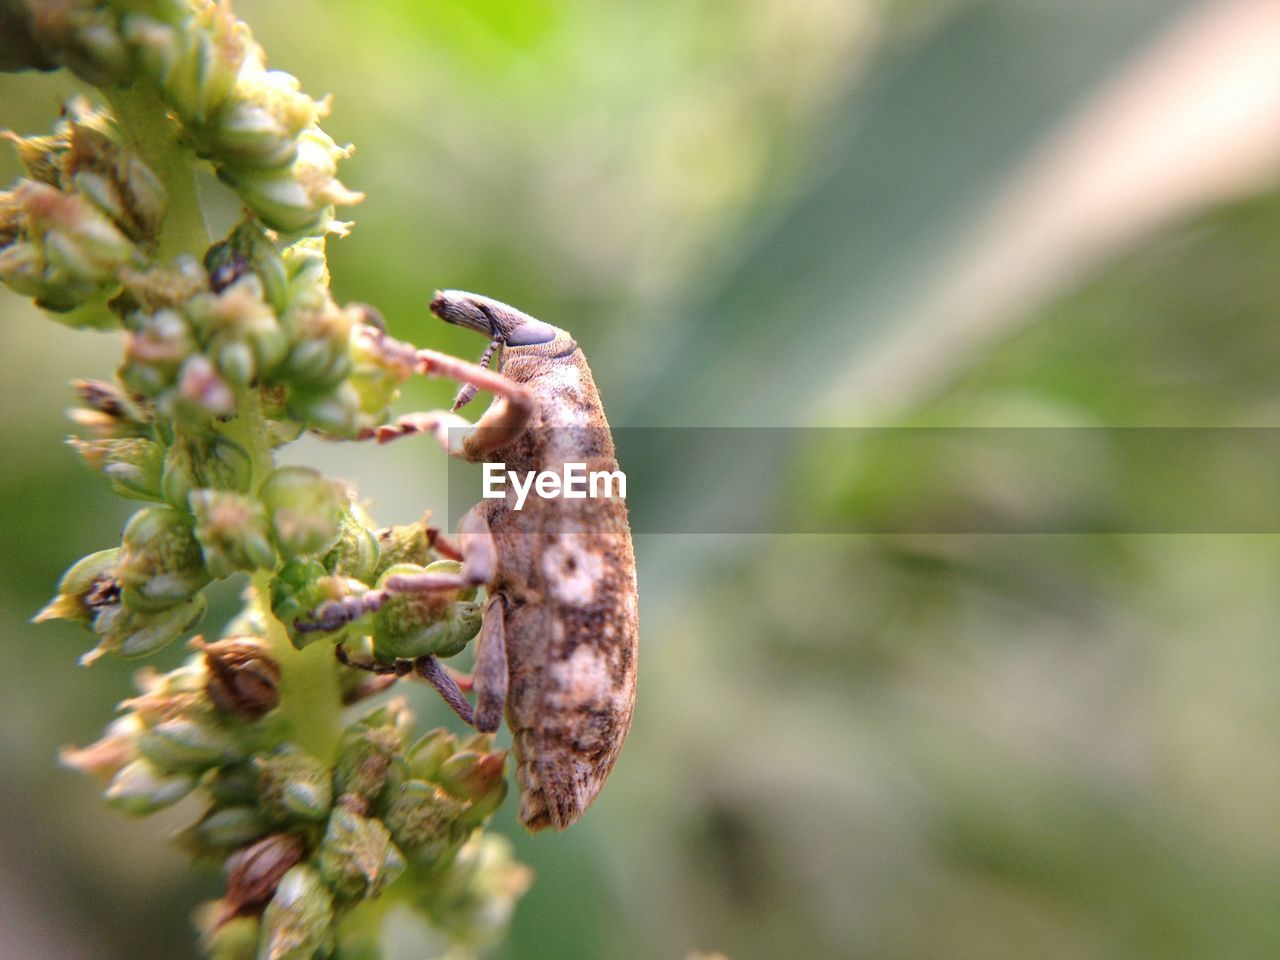 Close-up of bug on flower bud growing on plant